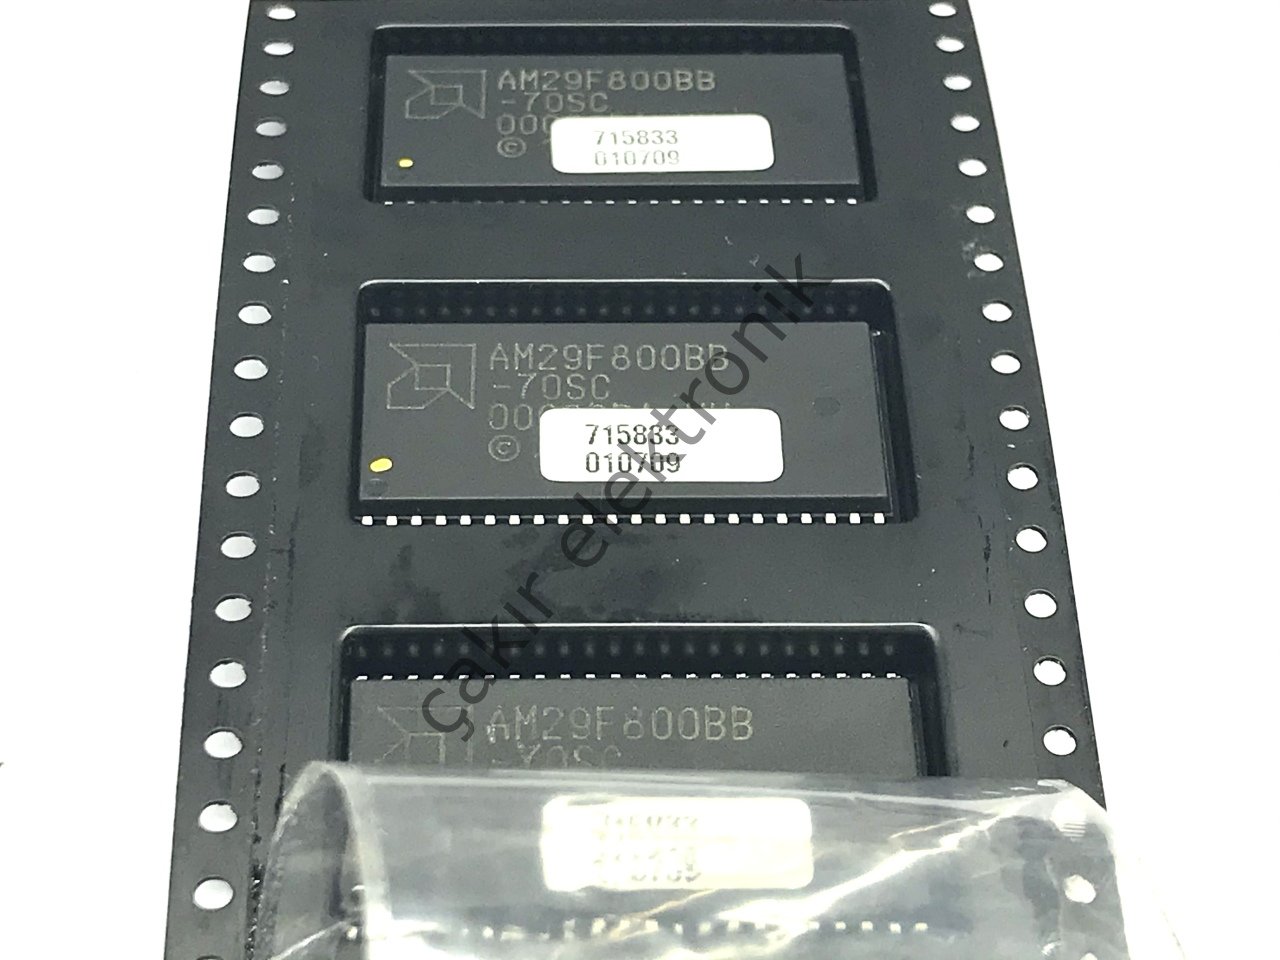 AM29F800BB-70SC - AM29F800 -  29F800 - 8 Megabit ( 1 M X 8-bit/512 K X 16-bit ) CMOS 5.0 Volt-only, Boot Sector Flash Memory